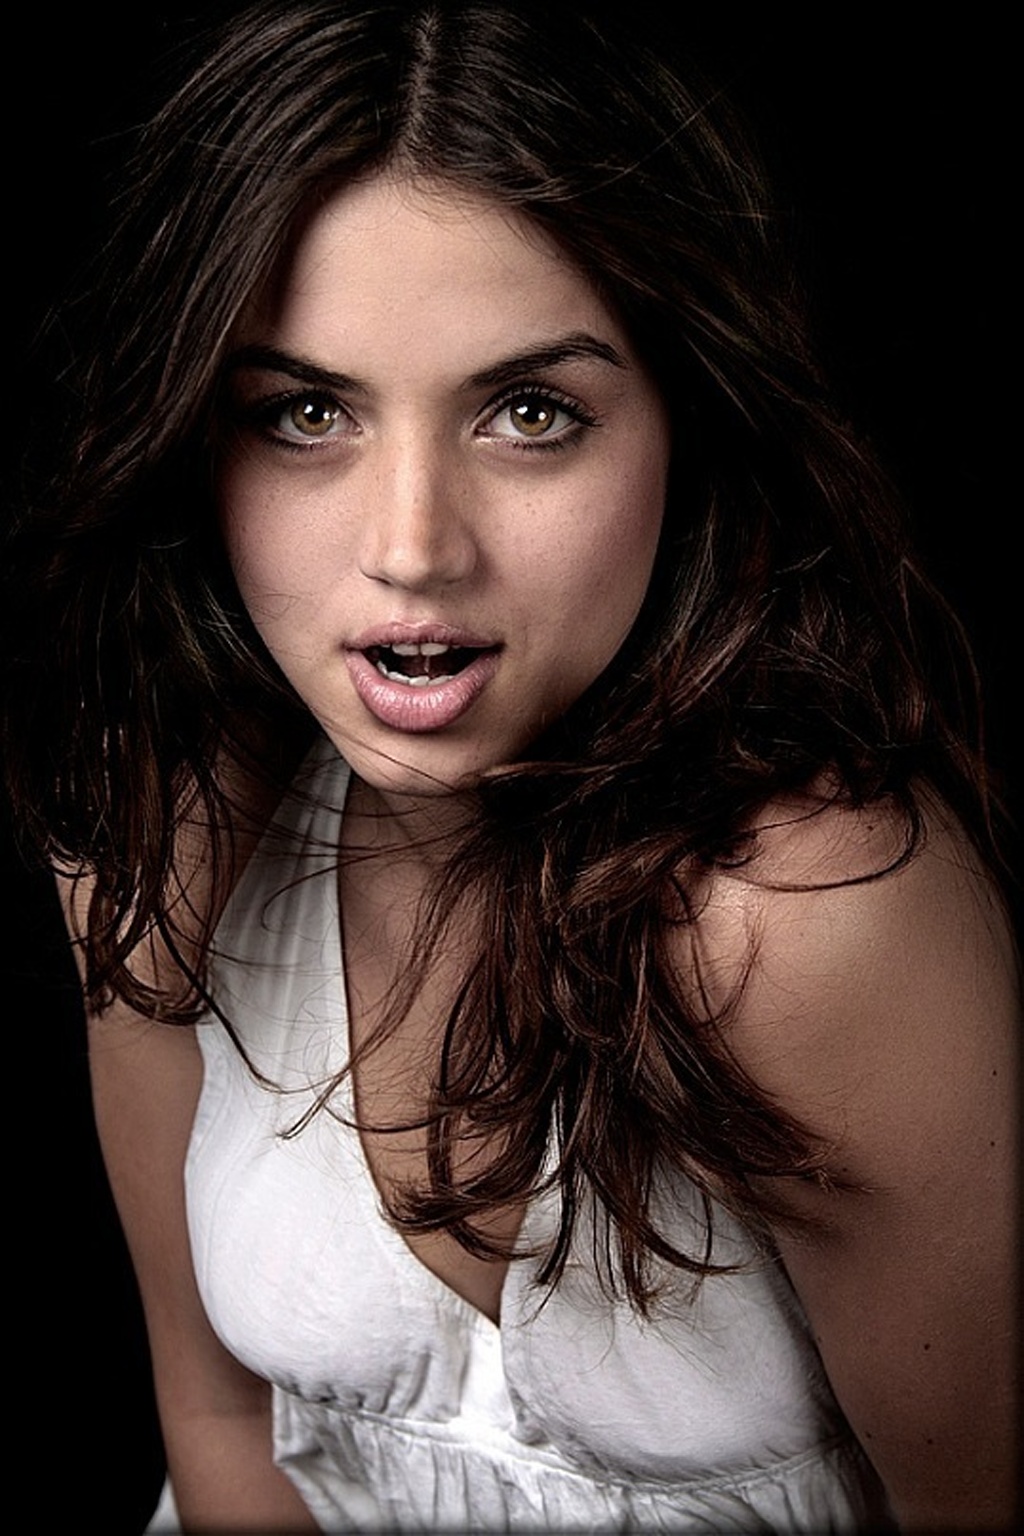 Ana De Armas Hd Wallpapers Free Download In High Quality And Resolution